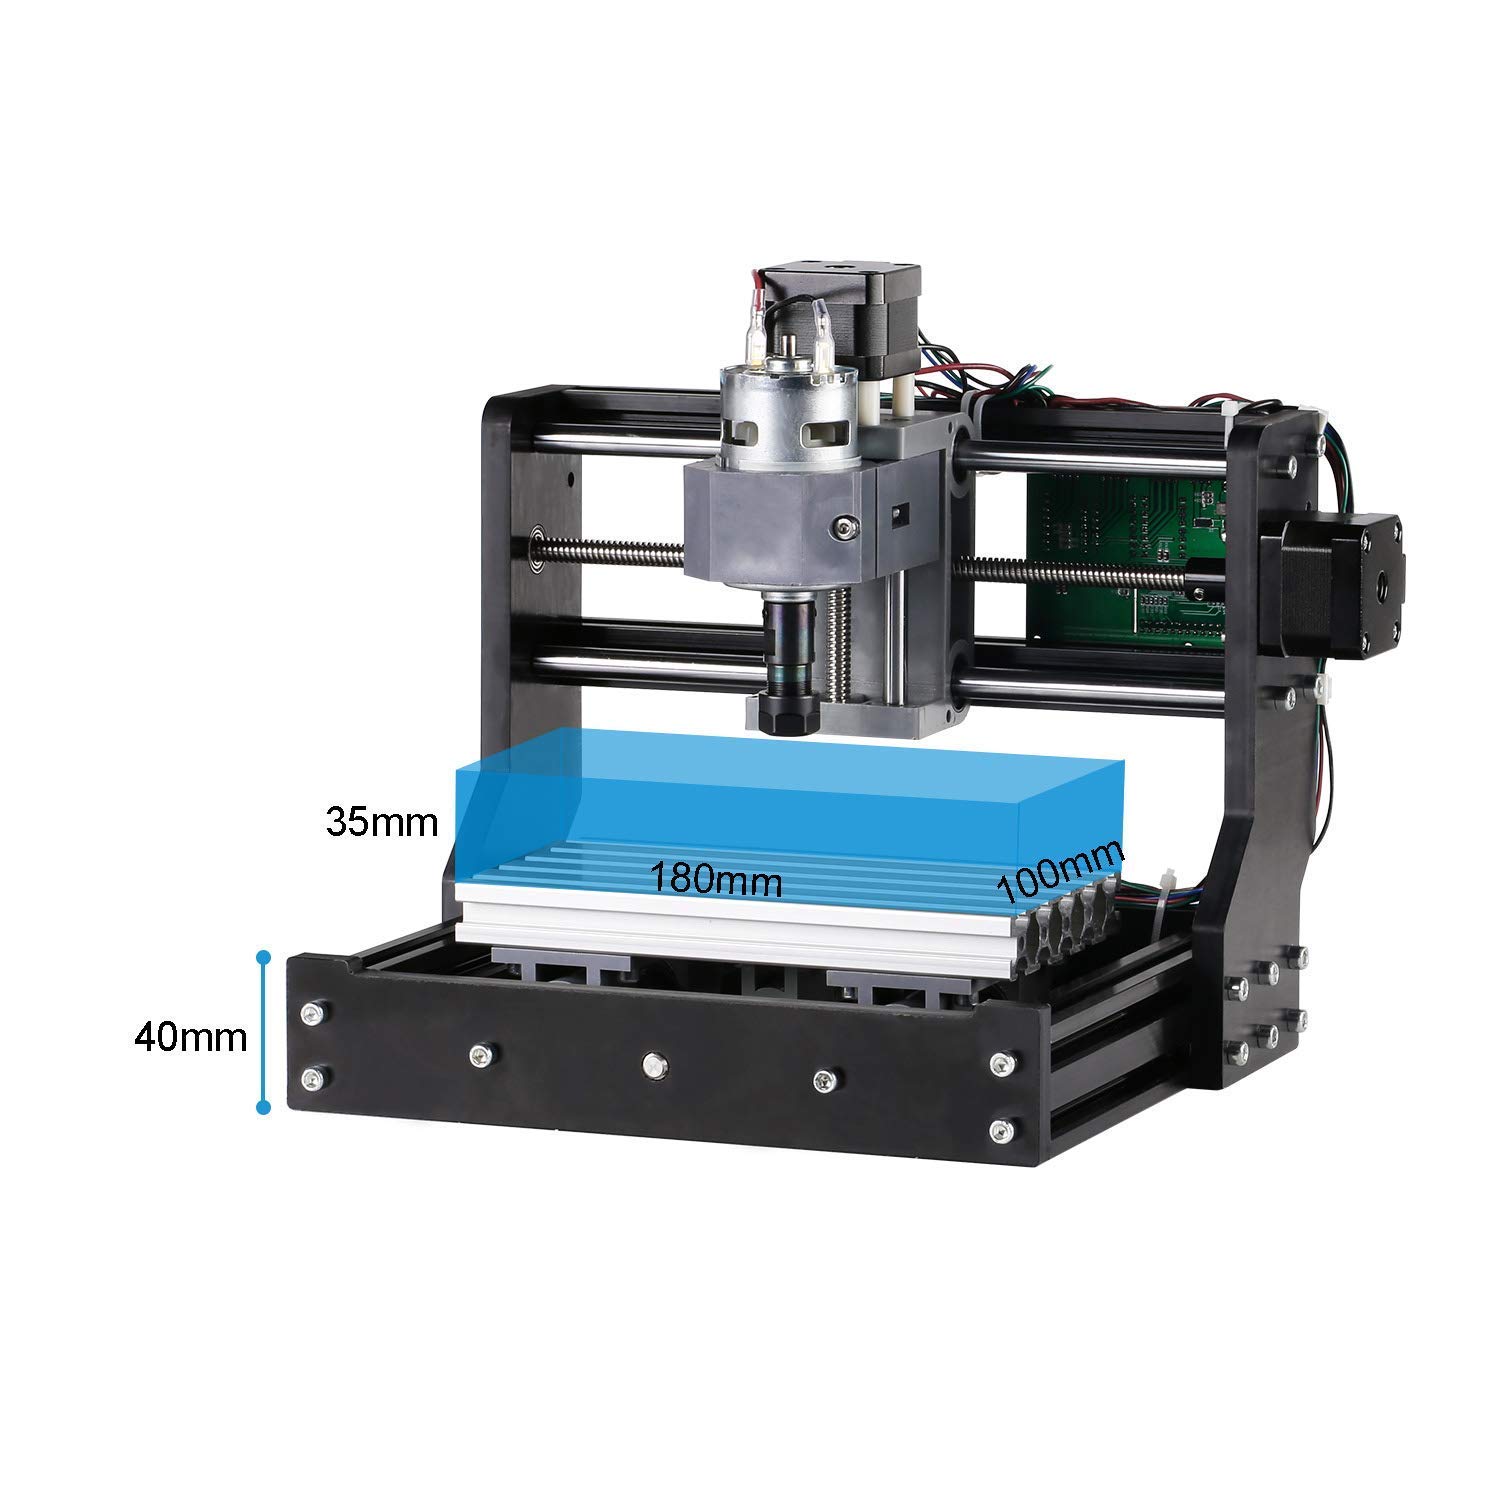 Upgrade-Version-1810-GRBL-Control-Mini-DIY-CNC-Router-Standard-Spindle-Motor-Wood-Laser-Engraving-Ma-1550110-4